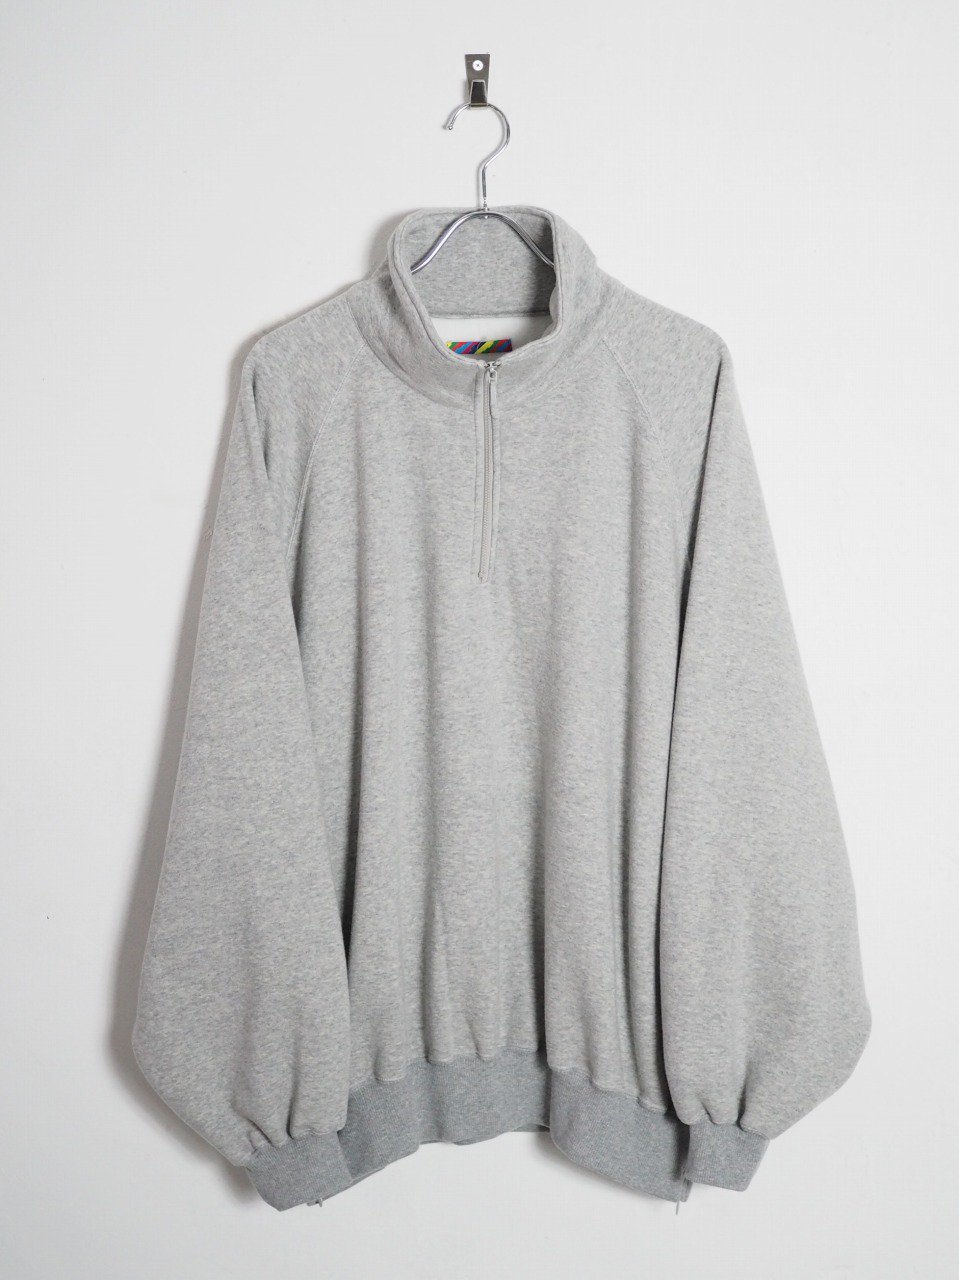 IS-NESS] RELAX PULLOVER HALF ZIP SWEAT SHIRTS -GRAY-